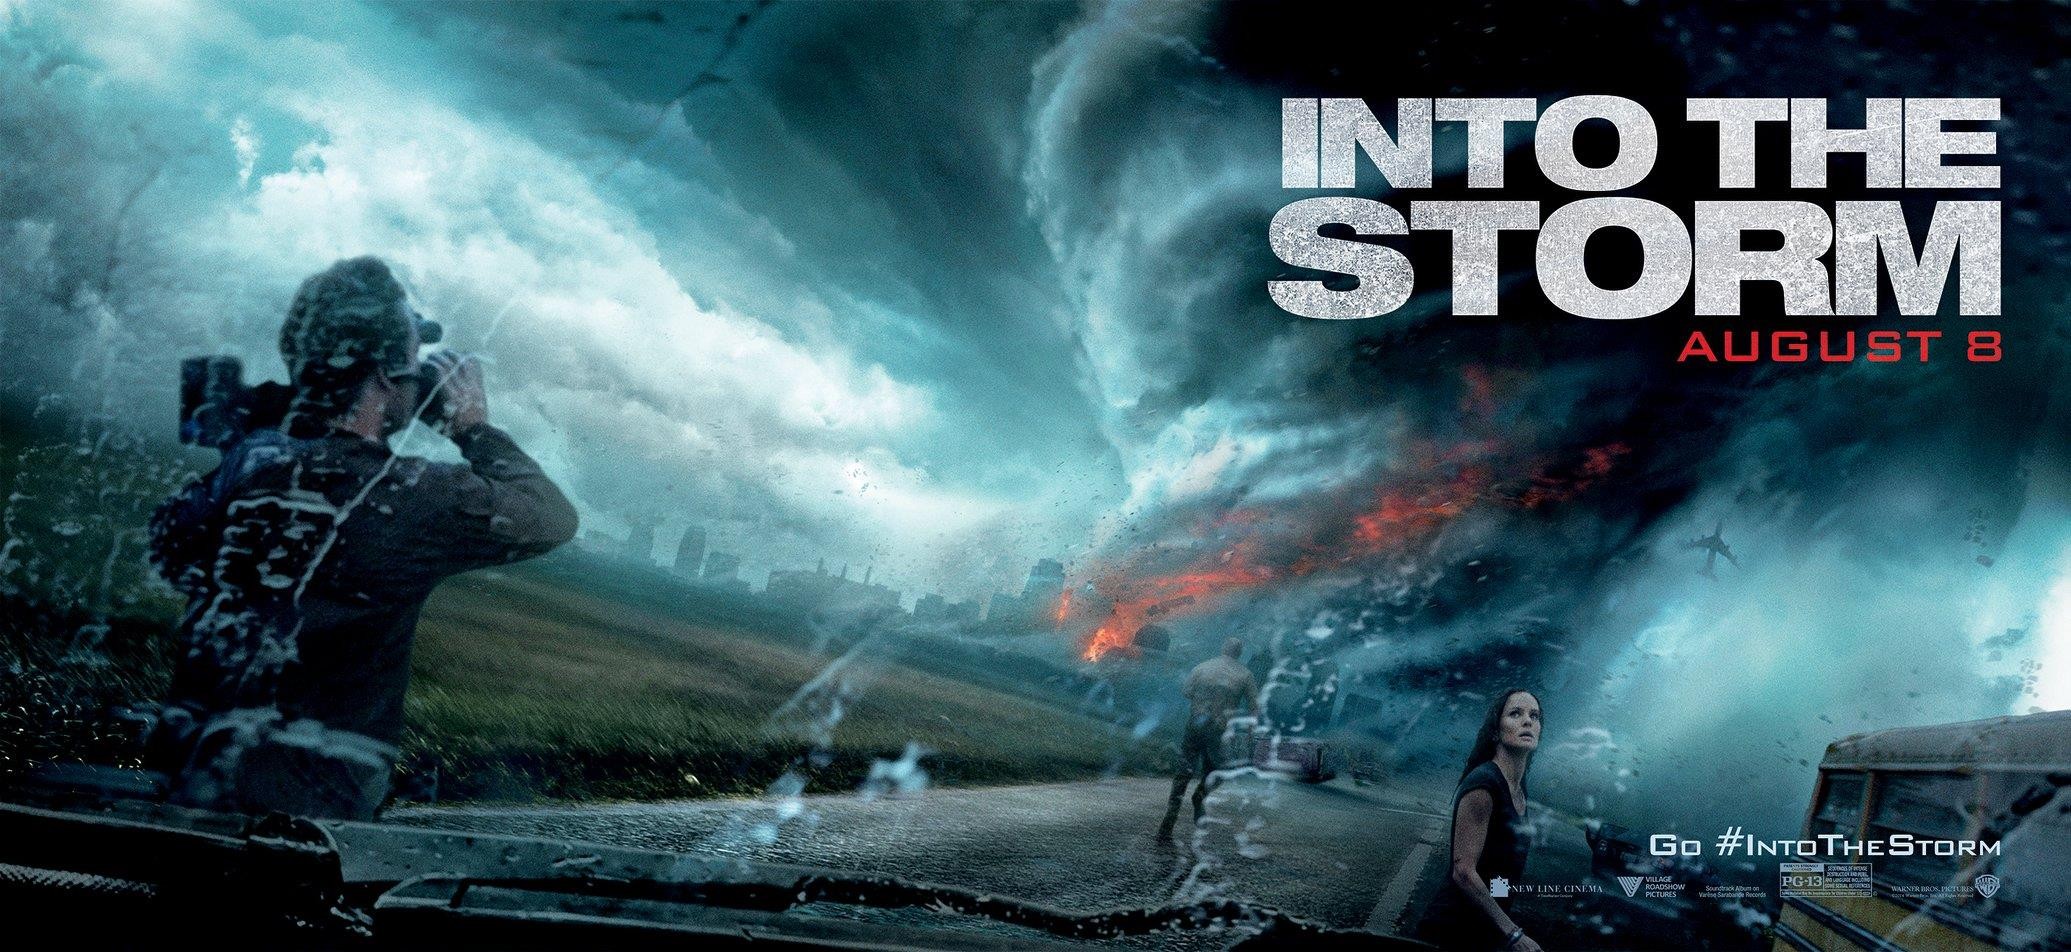 Mega Sized Movie Poster Image for Into the Storm (#3 of 5)